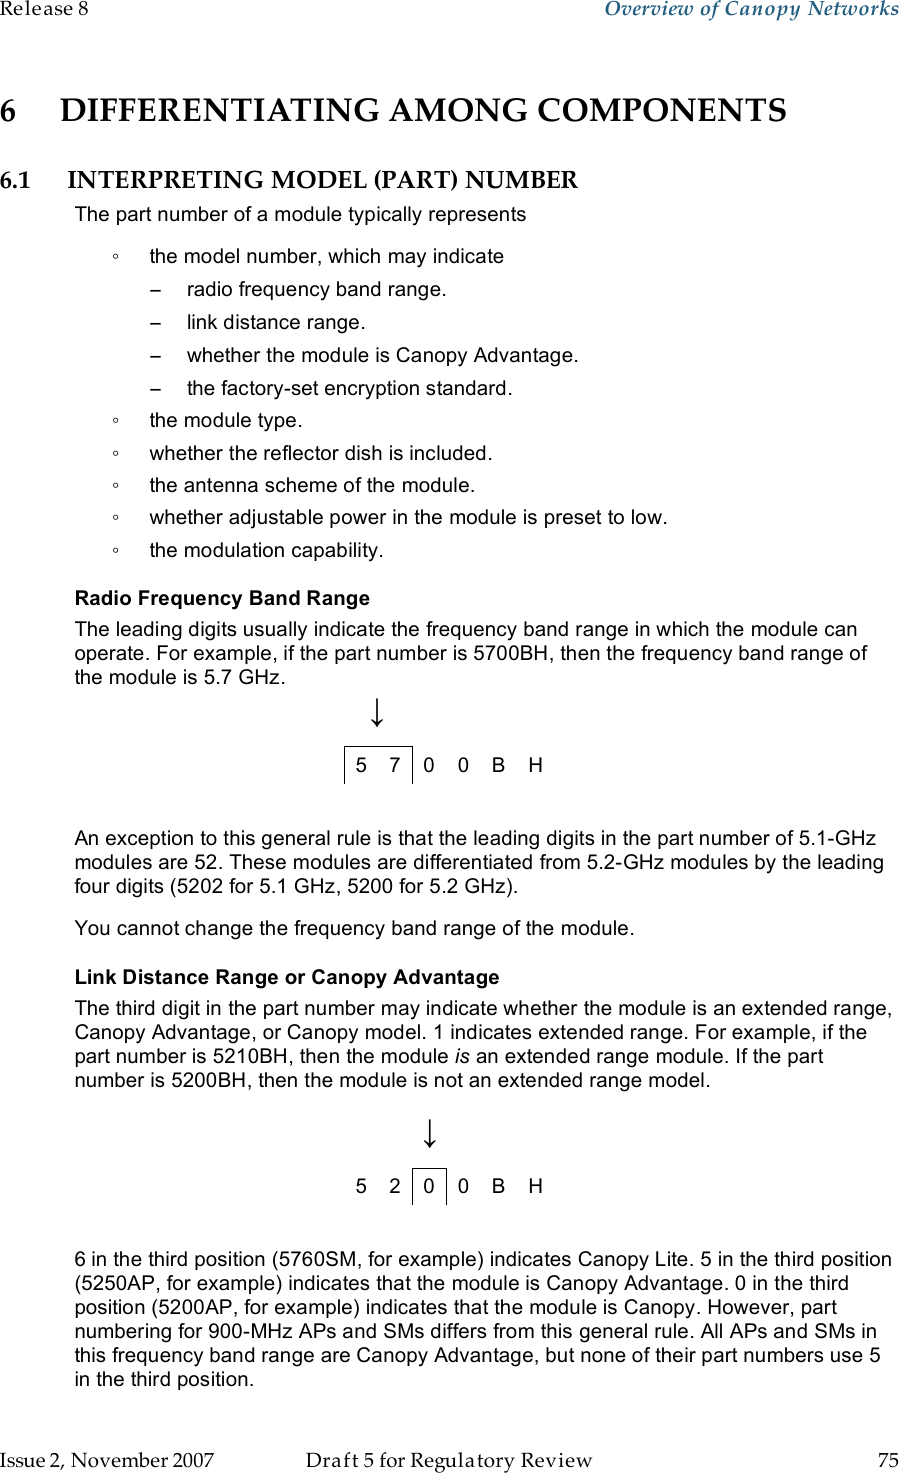 Release 8    Overview of Canopy Networks                  March 200                  Through Software Release 6.   Issue 2, November 2007  Draft 5 for Regulatory Review  75     6 DIFFERENTIATING AMONG COMPONENTS 6.1 INTERPRETING MODEL (PART) NUMBER The part number of a module typically represents  ◦  the model number, which may indicate −  radio frequency band range. −  link distance range. −  whether the module is Canopy Advantage. −  the factory-set encryption standard. ◦  the module type. ◦  whether the reflector dish is included. ◦  the antenna scheme of the module. ◦  whether adjustable power in the module is preset to low. ◦  the modulation capability. Radio Frequency Band Range The leading digits usually indicate the frequency band range in which the module can operate. For example, if the part number is 5700BH, then the frequency band range of the module is 5.7 GHz.                                         ↓ 5 7 0 0 B H  An exception to this general rule is that the leading digits in the part number of 5.1-GHz modules are 52. These modules are differentiated from 5.2-GHz modules by the leading four digits (5202 for 5.1 GHz, 5200 for 5.2 GHz). You cannot change the frequency band range of the module. Link Distance Range or Canopy Advantage The third digit in the part number may indicate whether the module is an extended range, Canopy Advantage, or Canopy model. 1 indicates extended range. For example, if the part number is 5210BH, then the module is an extended range module. If the part number is 5200BH, then the module is not an extended range model.                                        ↓ 5 2 0 0 B H  6 in the third position (5760SM, for example) indicates Canopy Lite. 5 in the third position (5250AP, for example) indicates that the module is Canopy Advantage. 0 in the third position (5200AP, for example) indicates that the module is Canopy. However, part numbering for 900-MHz APs and SMs differs from this general rule. All APs and SMs in this frequency band range are Canopy Advantage, but none of their part numbers use 5 in the third position. 